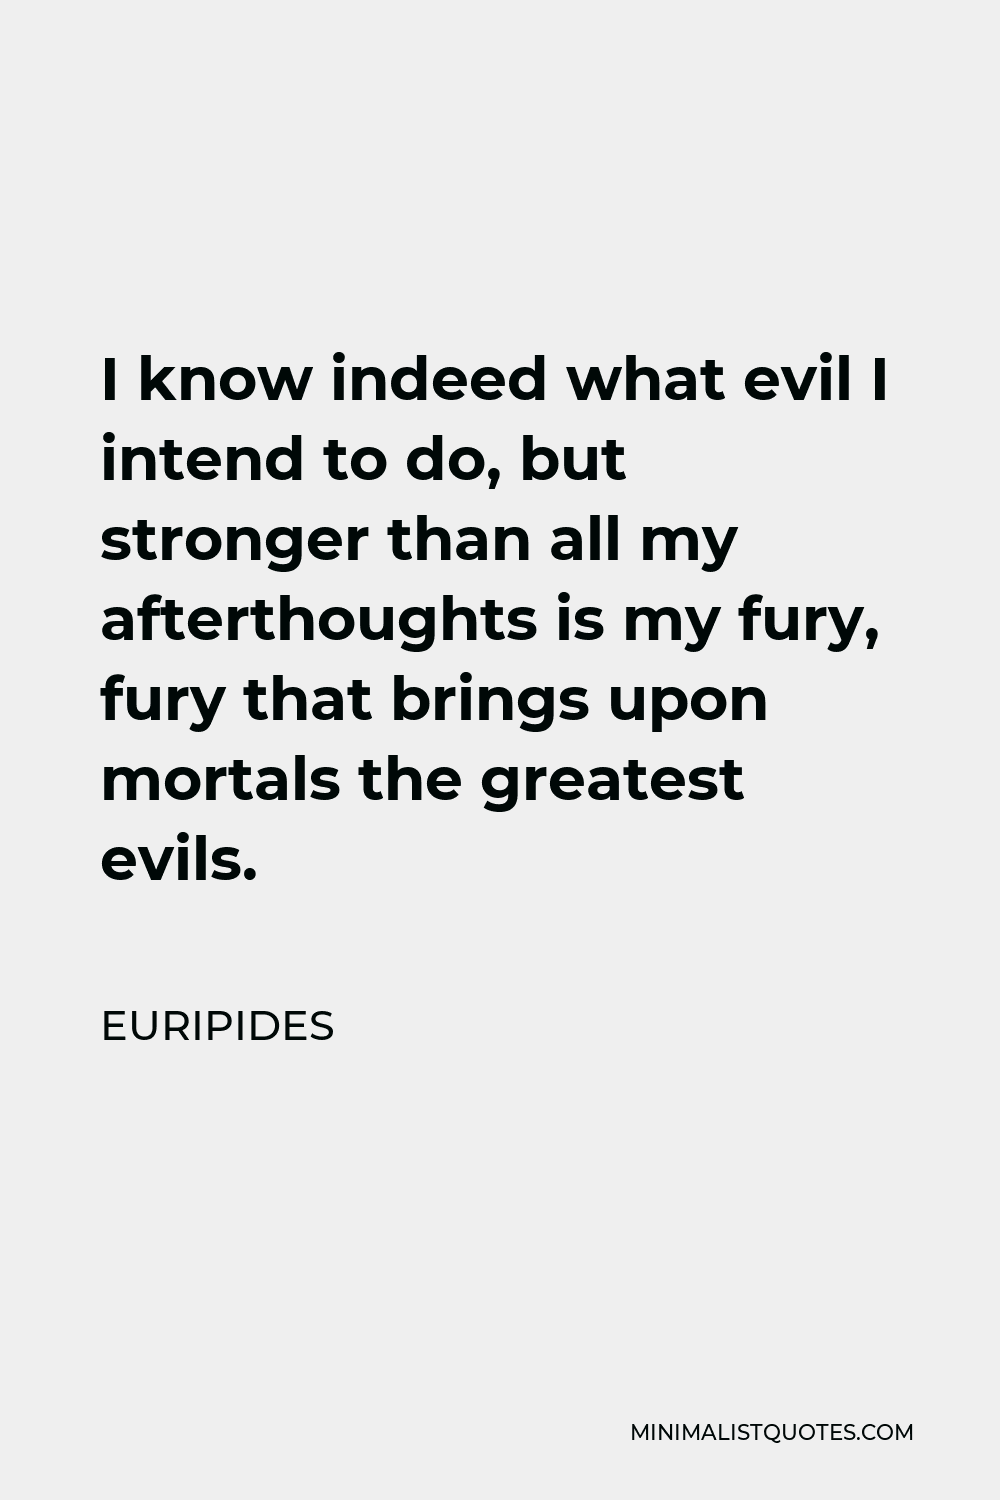 Euripides Quote - I know indeed what evil I intend to do, but stronger than all my afterthoughts is my fury, fury that brings upon mortals the greatest evils.